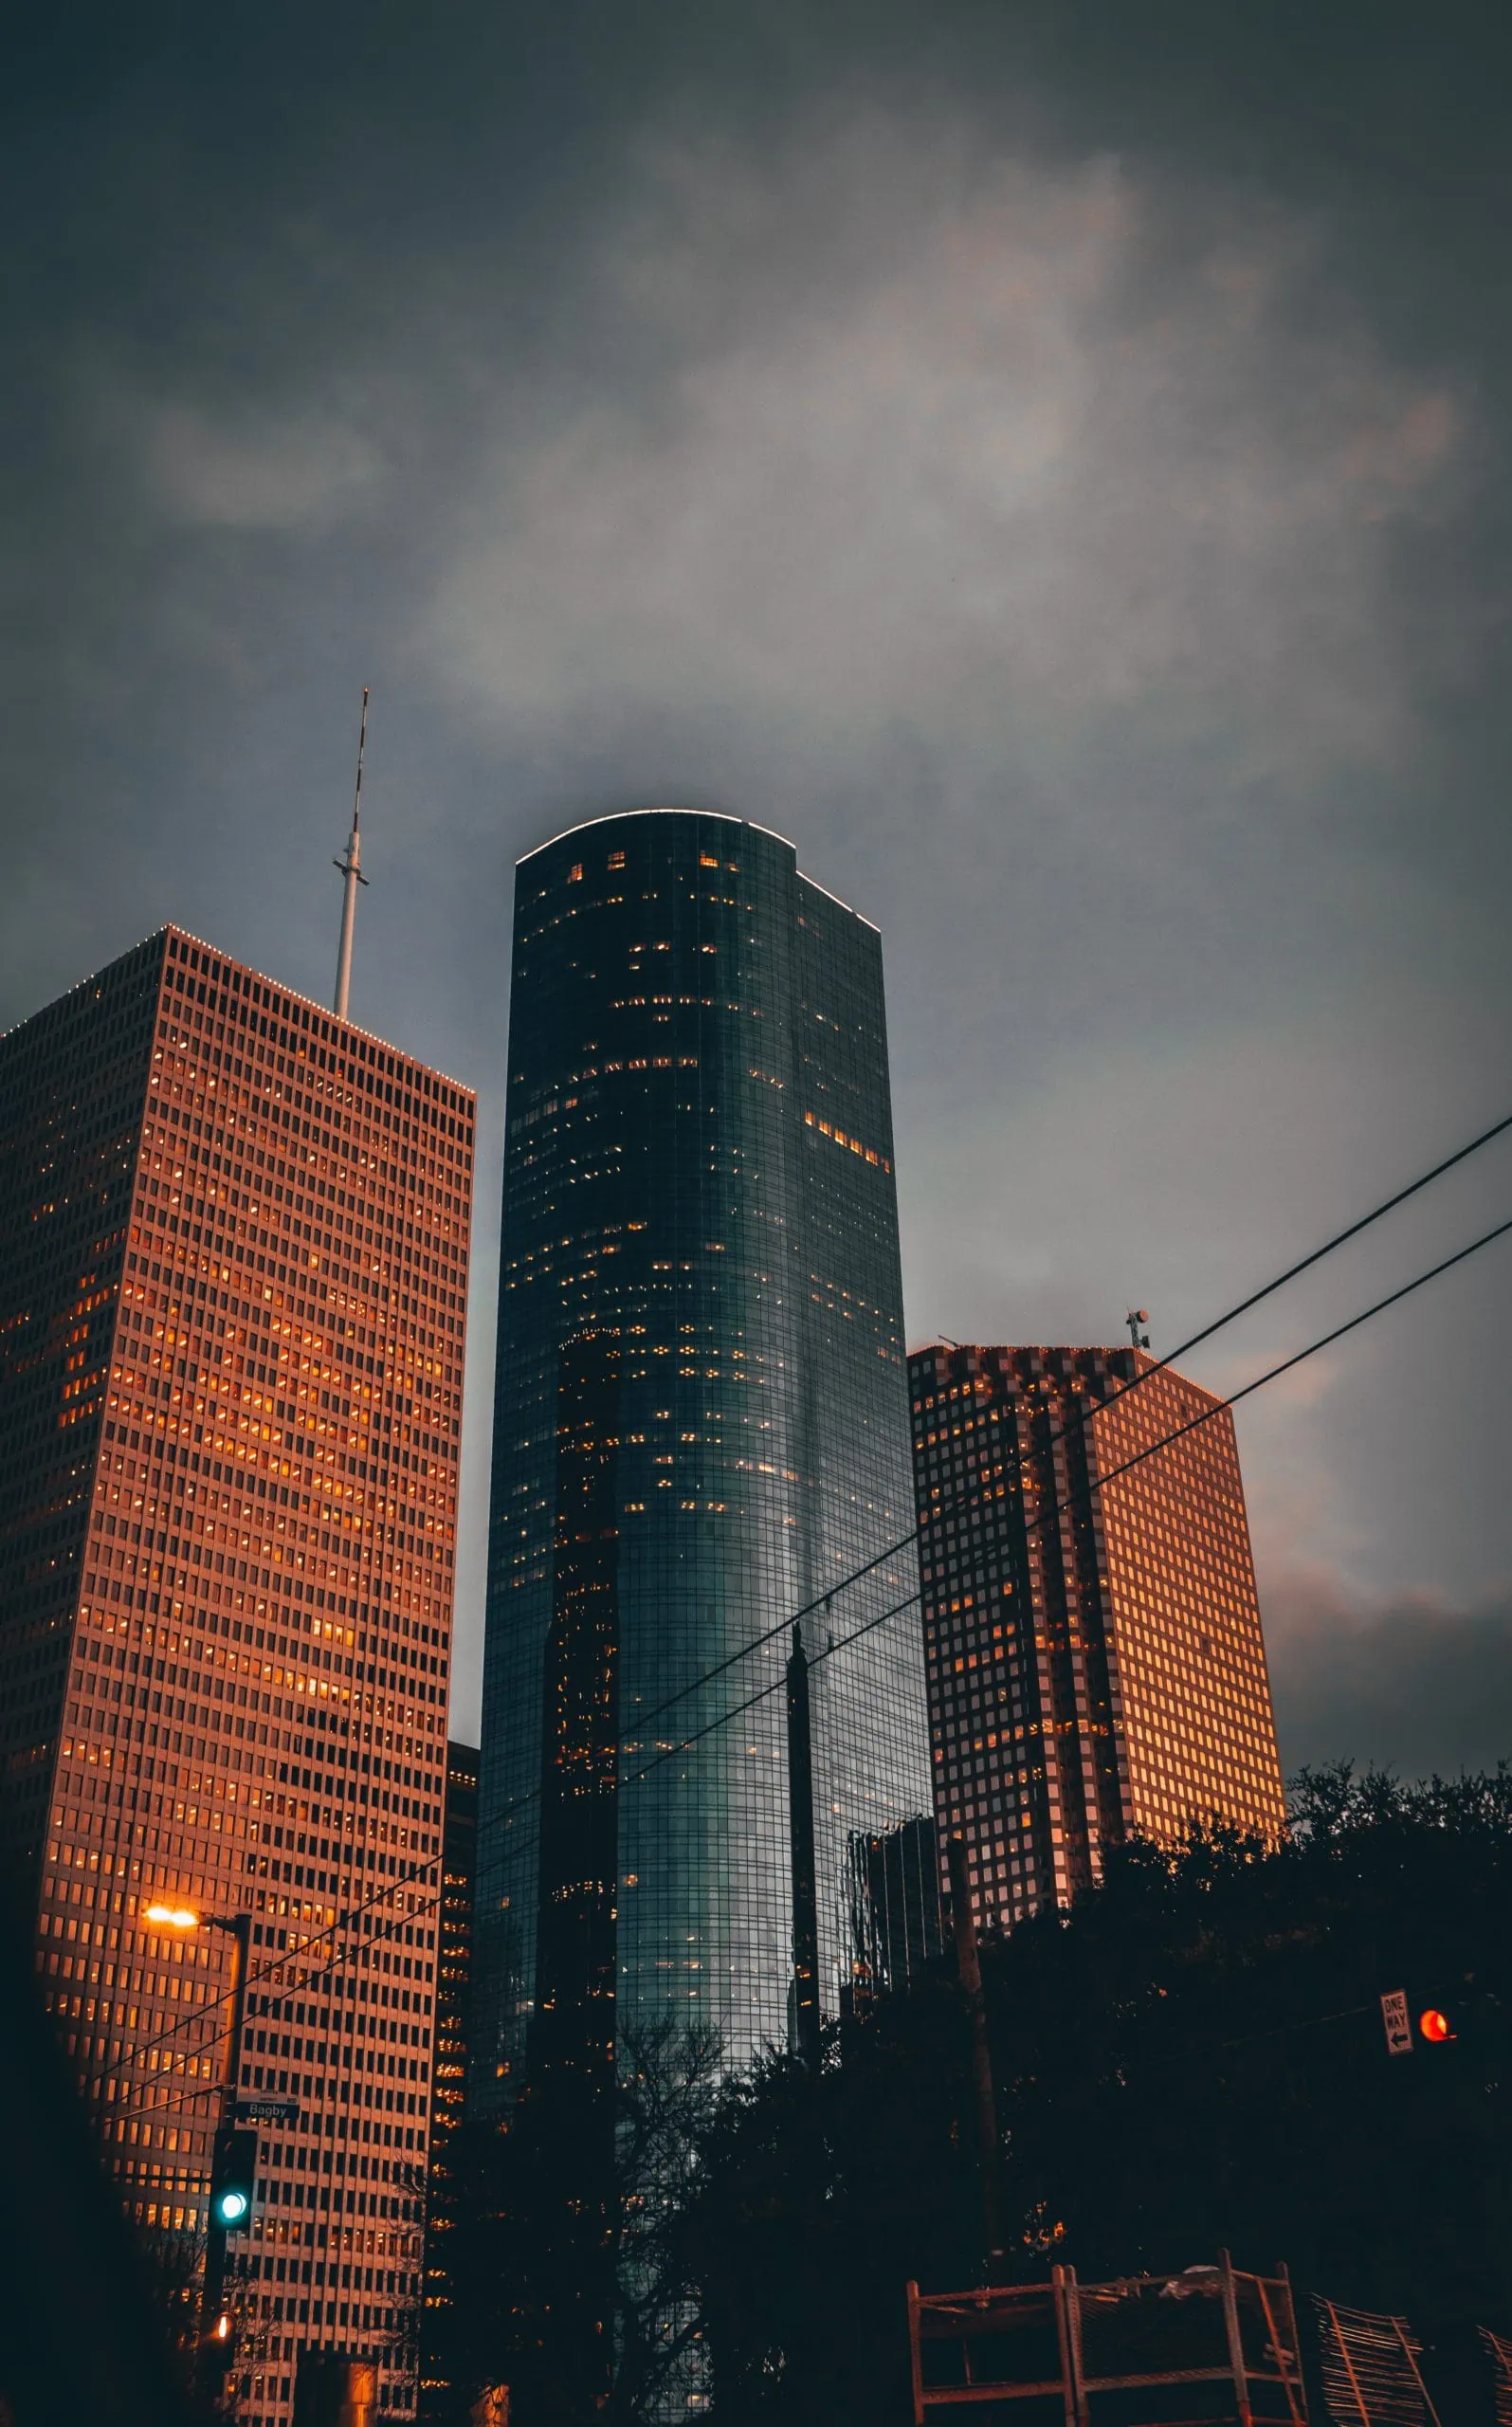 Downtown Houston enterprises with security cameras